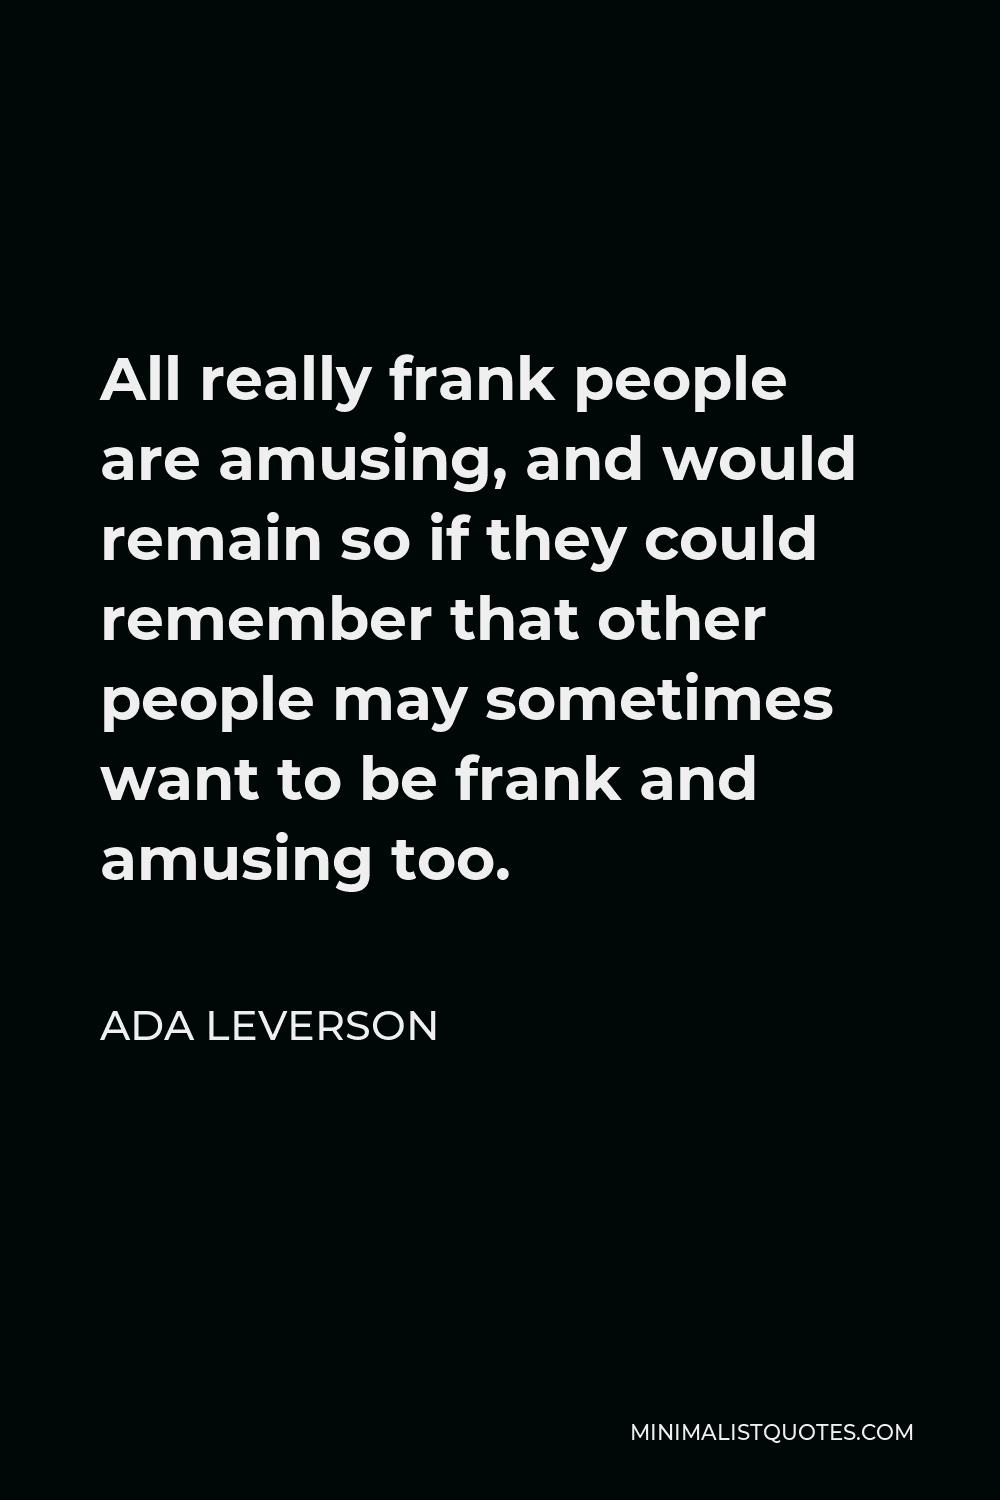 Ada Leverson Quote - All really frank people are amusing, and would remain so if they could remember that other people may sometimes want to be frank and amusing too.